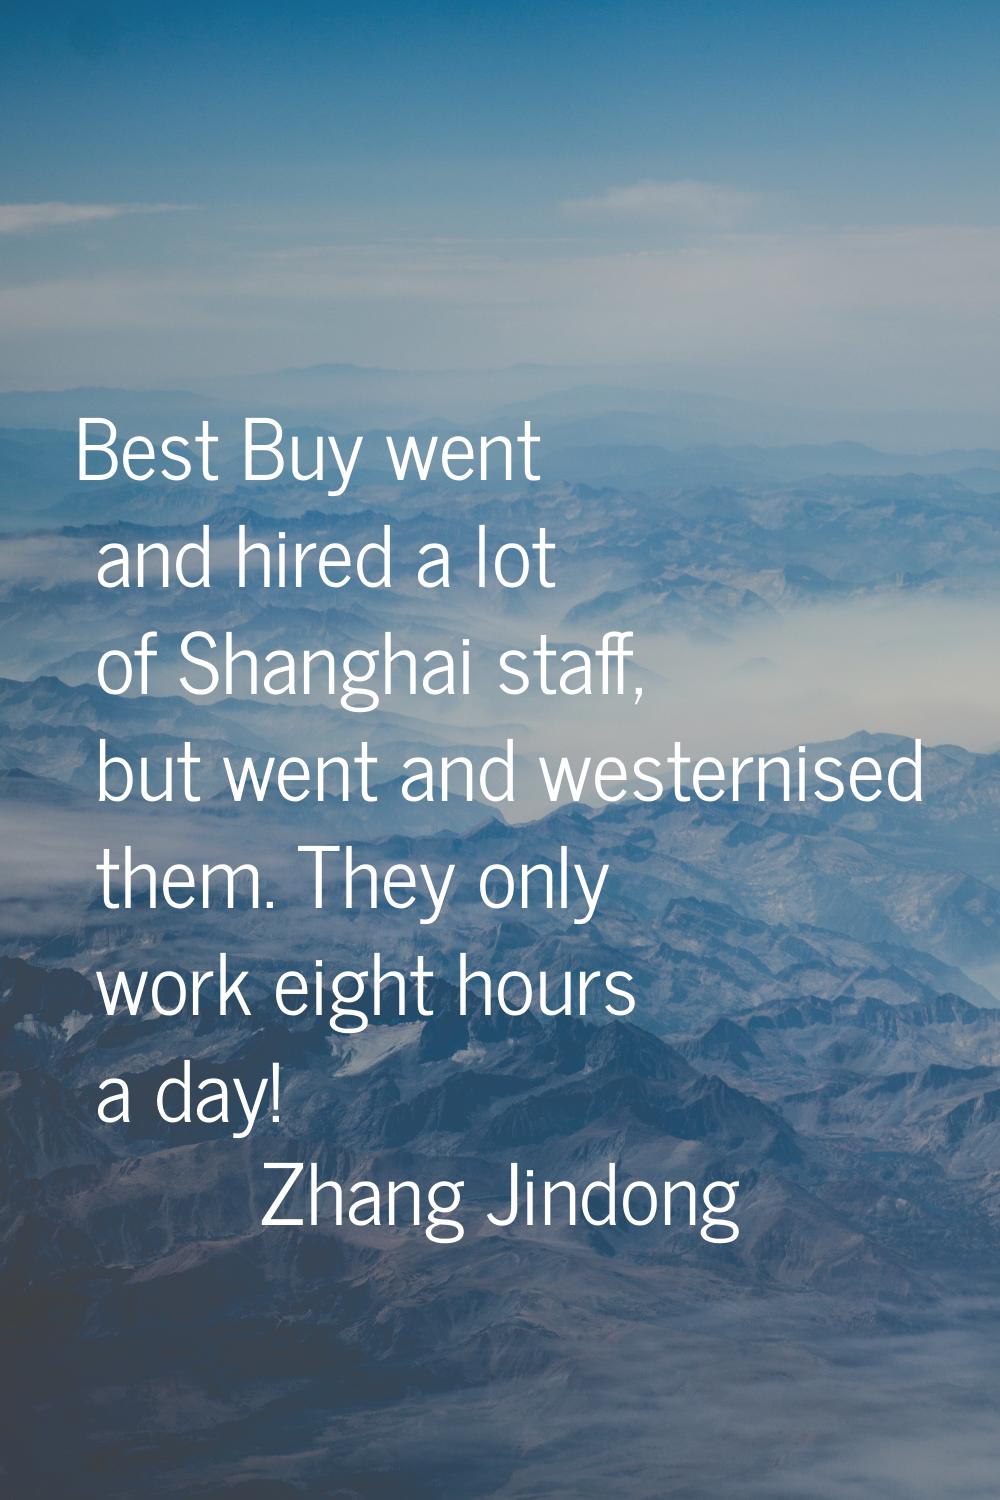 Best Buy went and hired a lot of Shanghai staff, but went and westernised them. They only work eigh